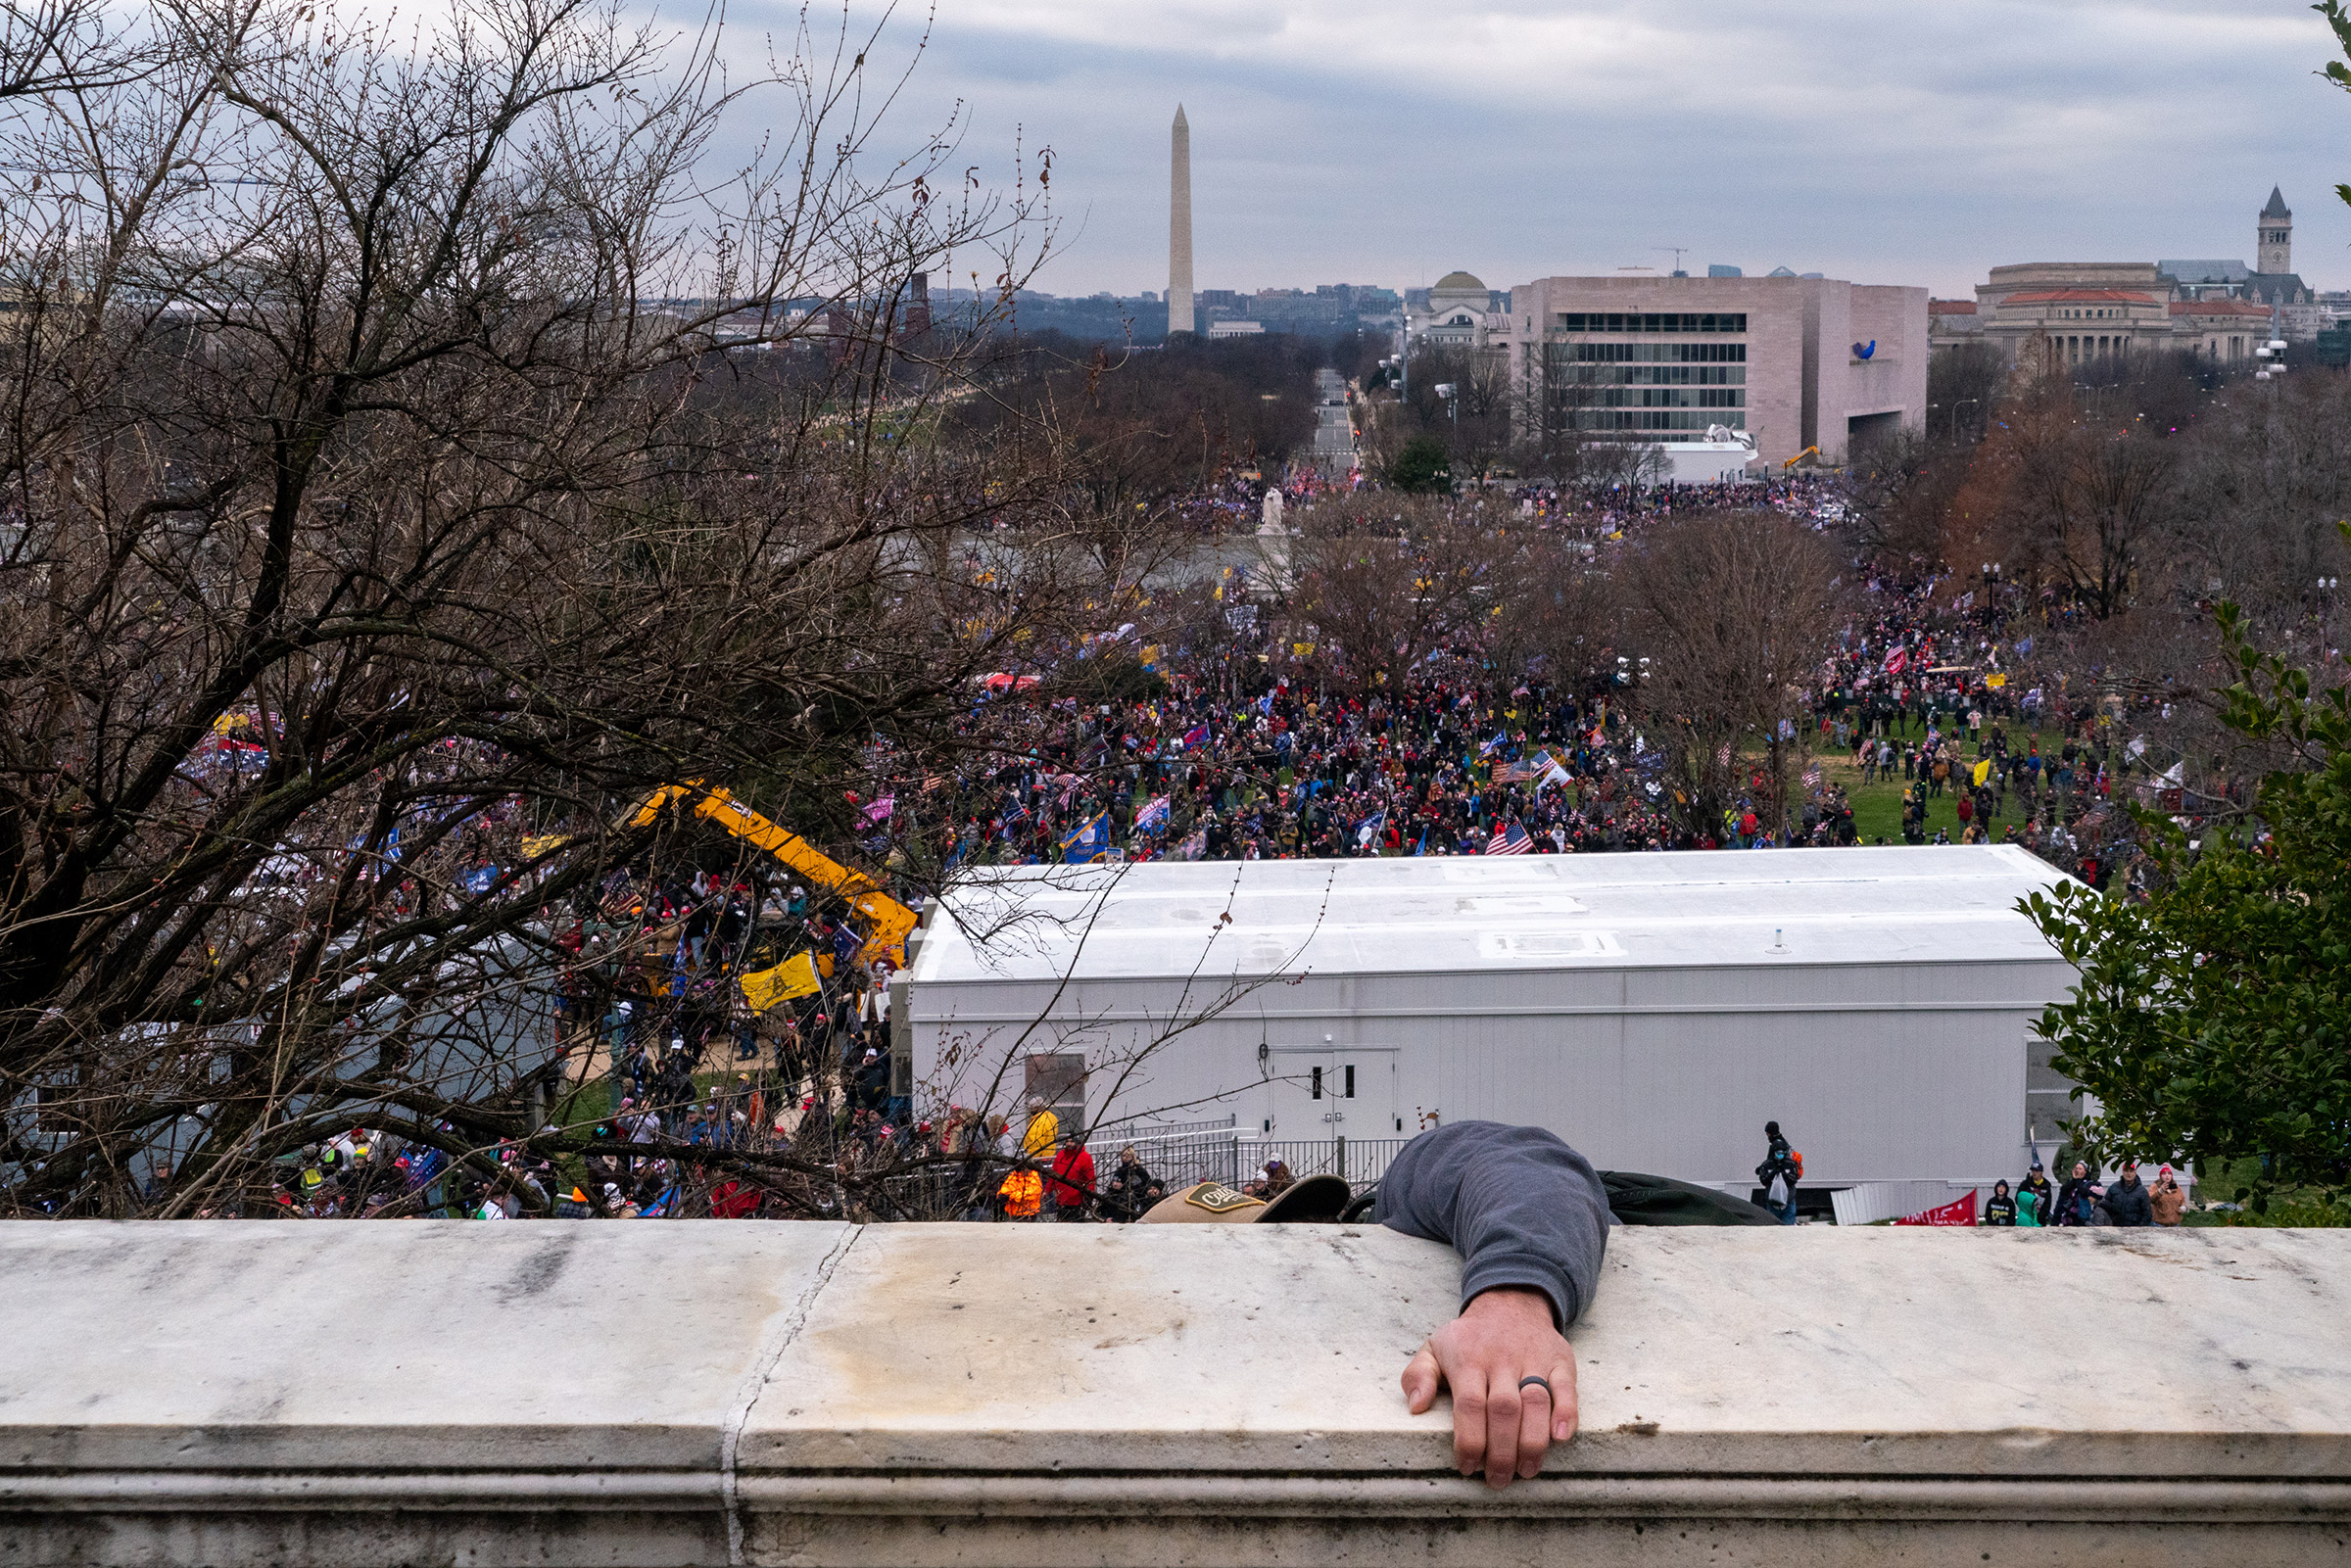 A rioter climbs the walls of the U.S. Capitol after President Trump encouraged a rally audience to pressure Republican lawmakers on Jan. 6. (Peter van Agtmael—Magnum Photos for TIME)